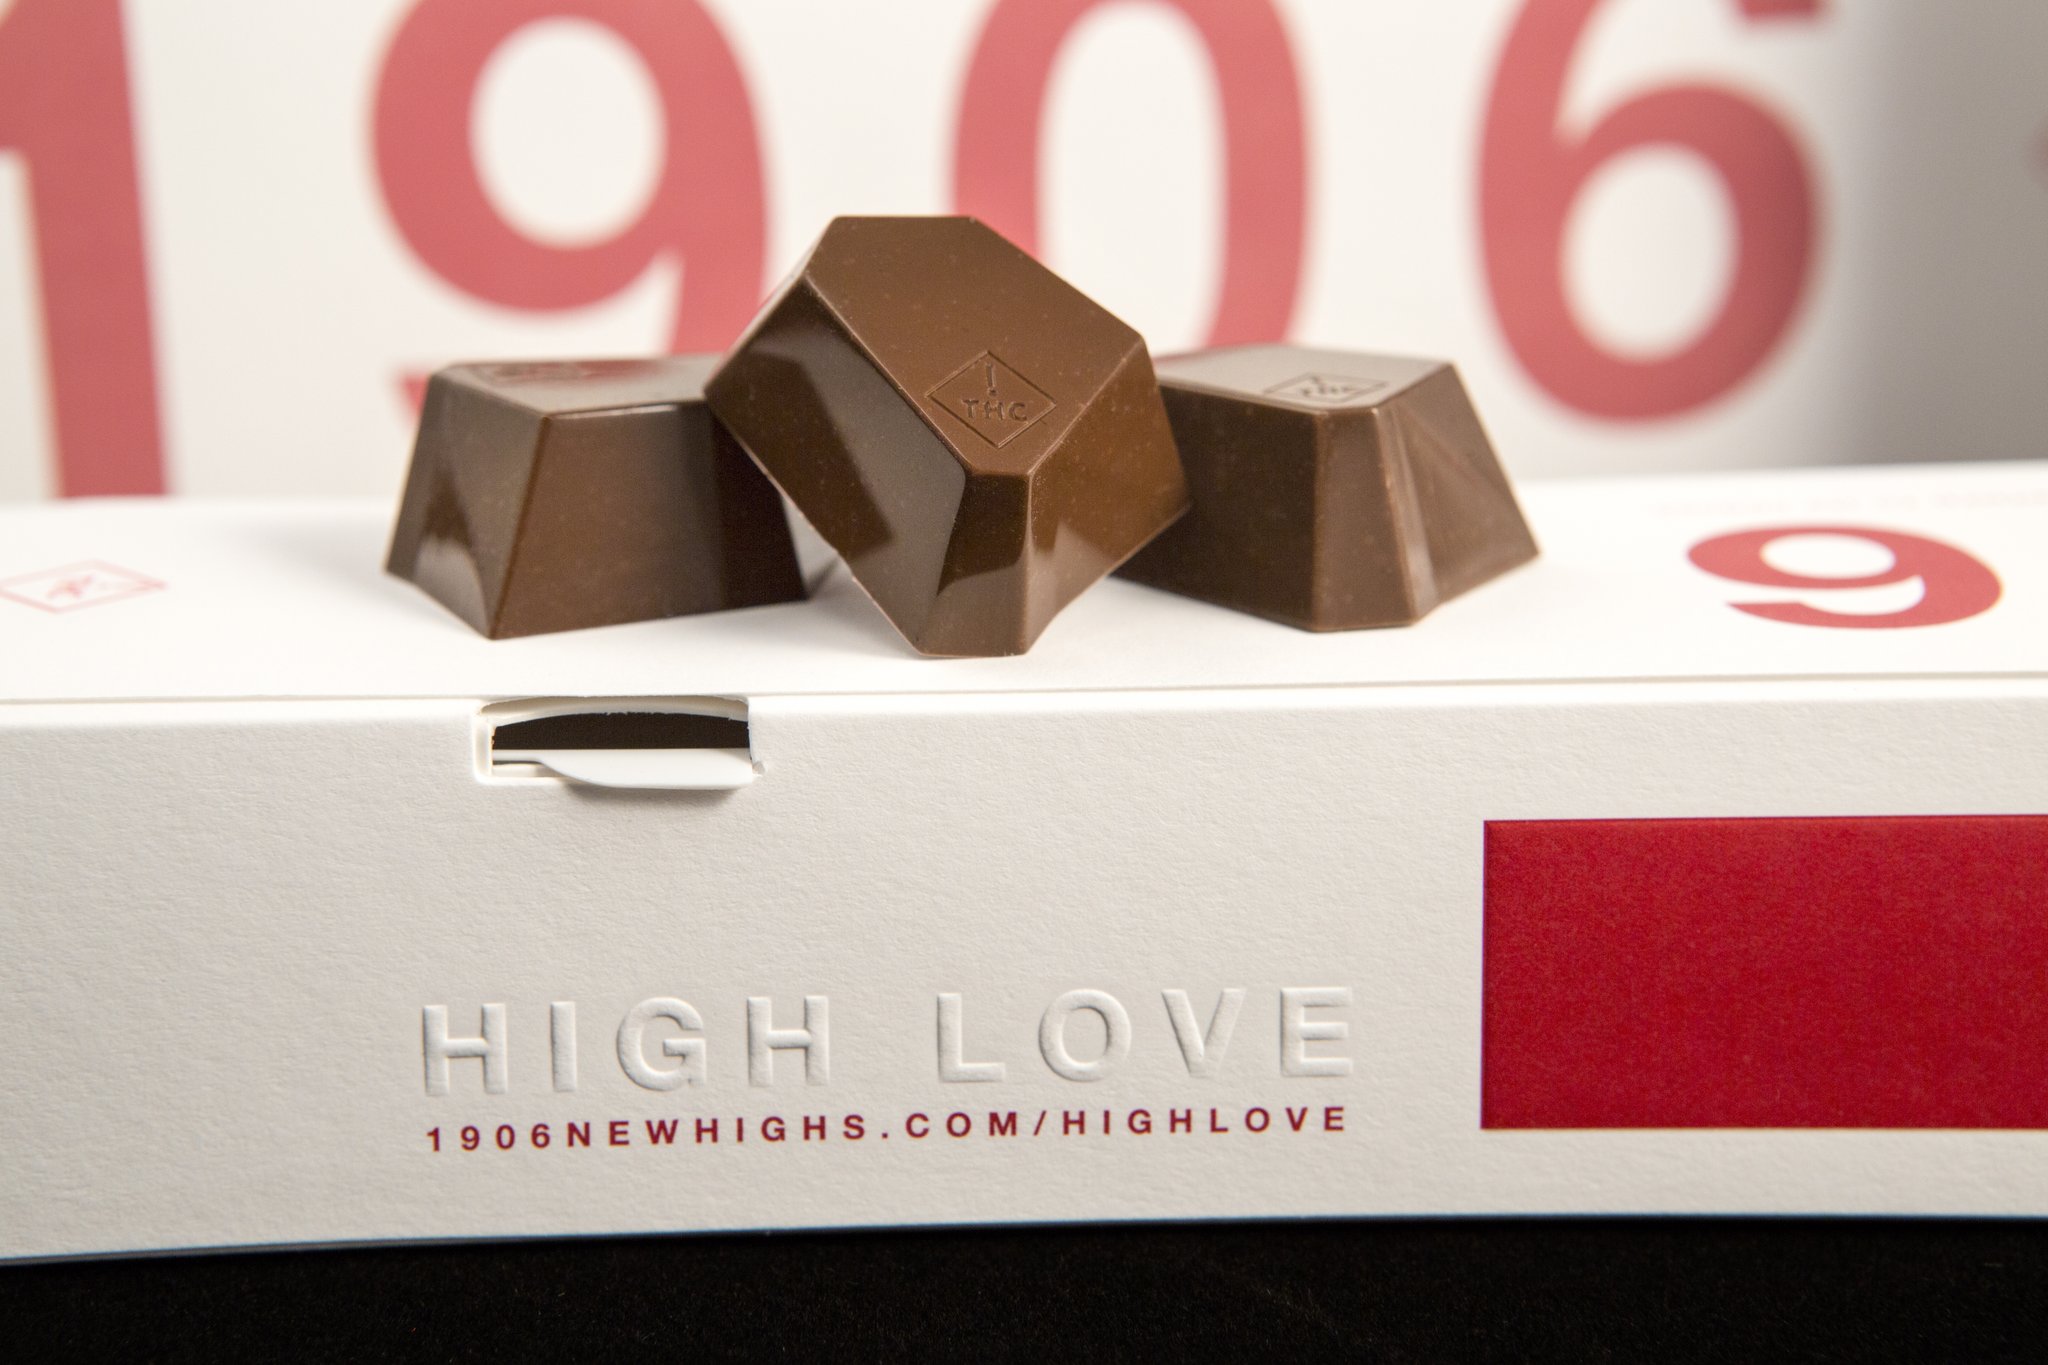 This Chocolate Aphrodisiac Will Get You High on Love (and Other Things)